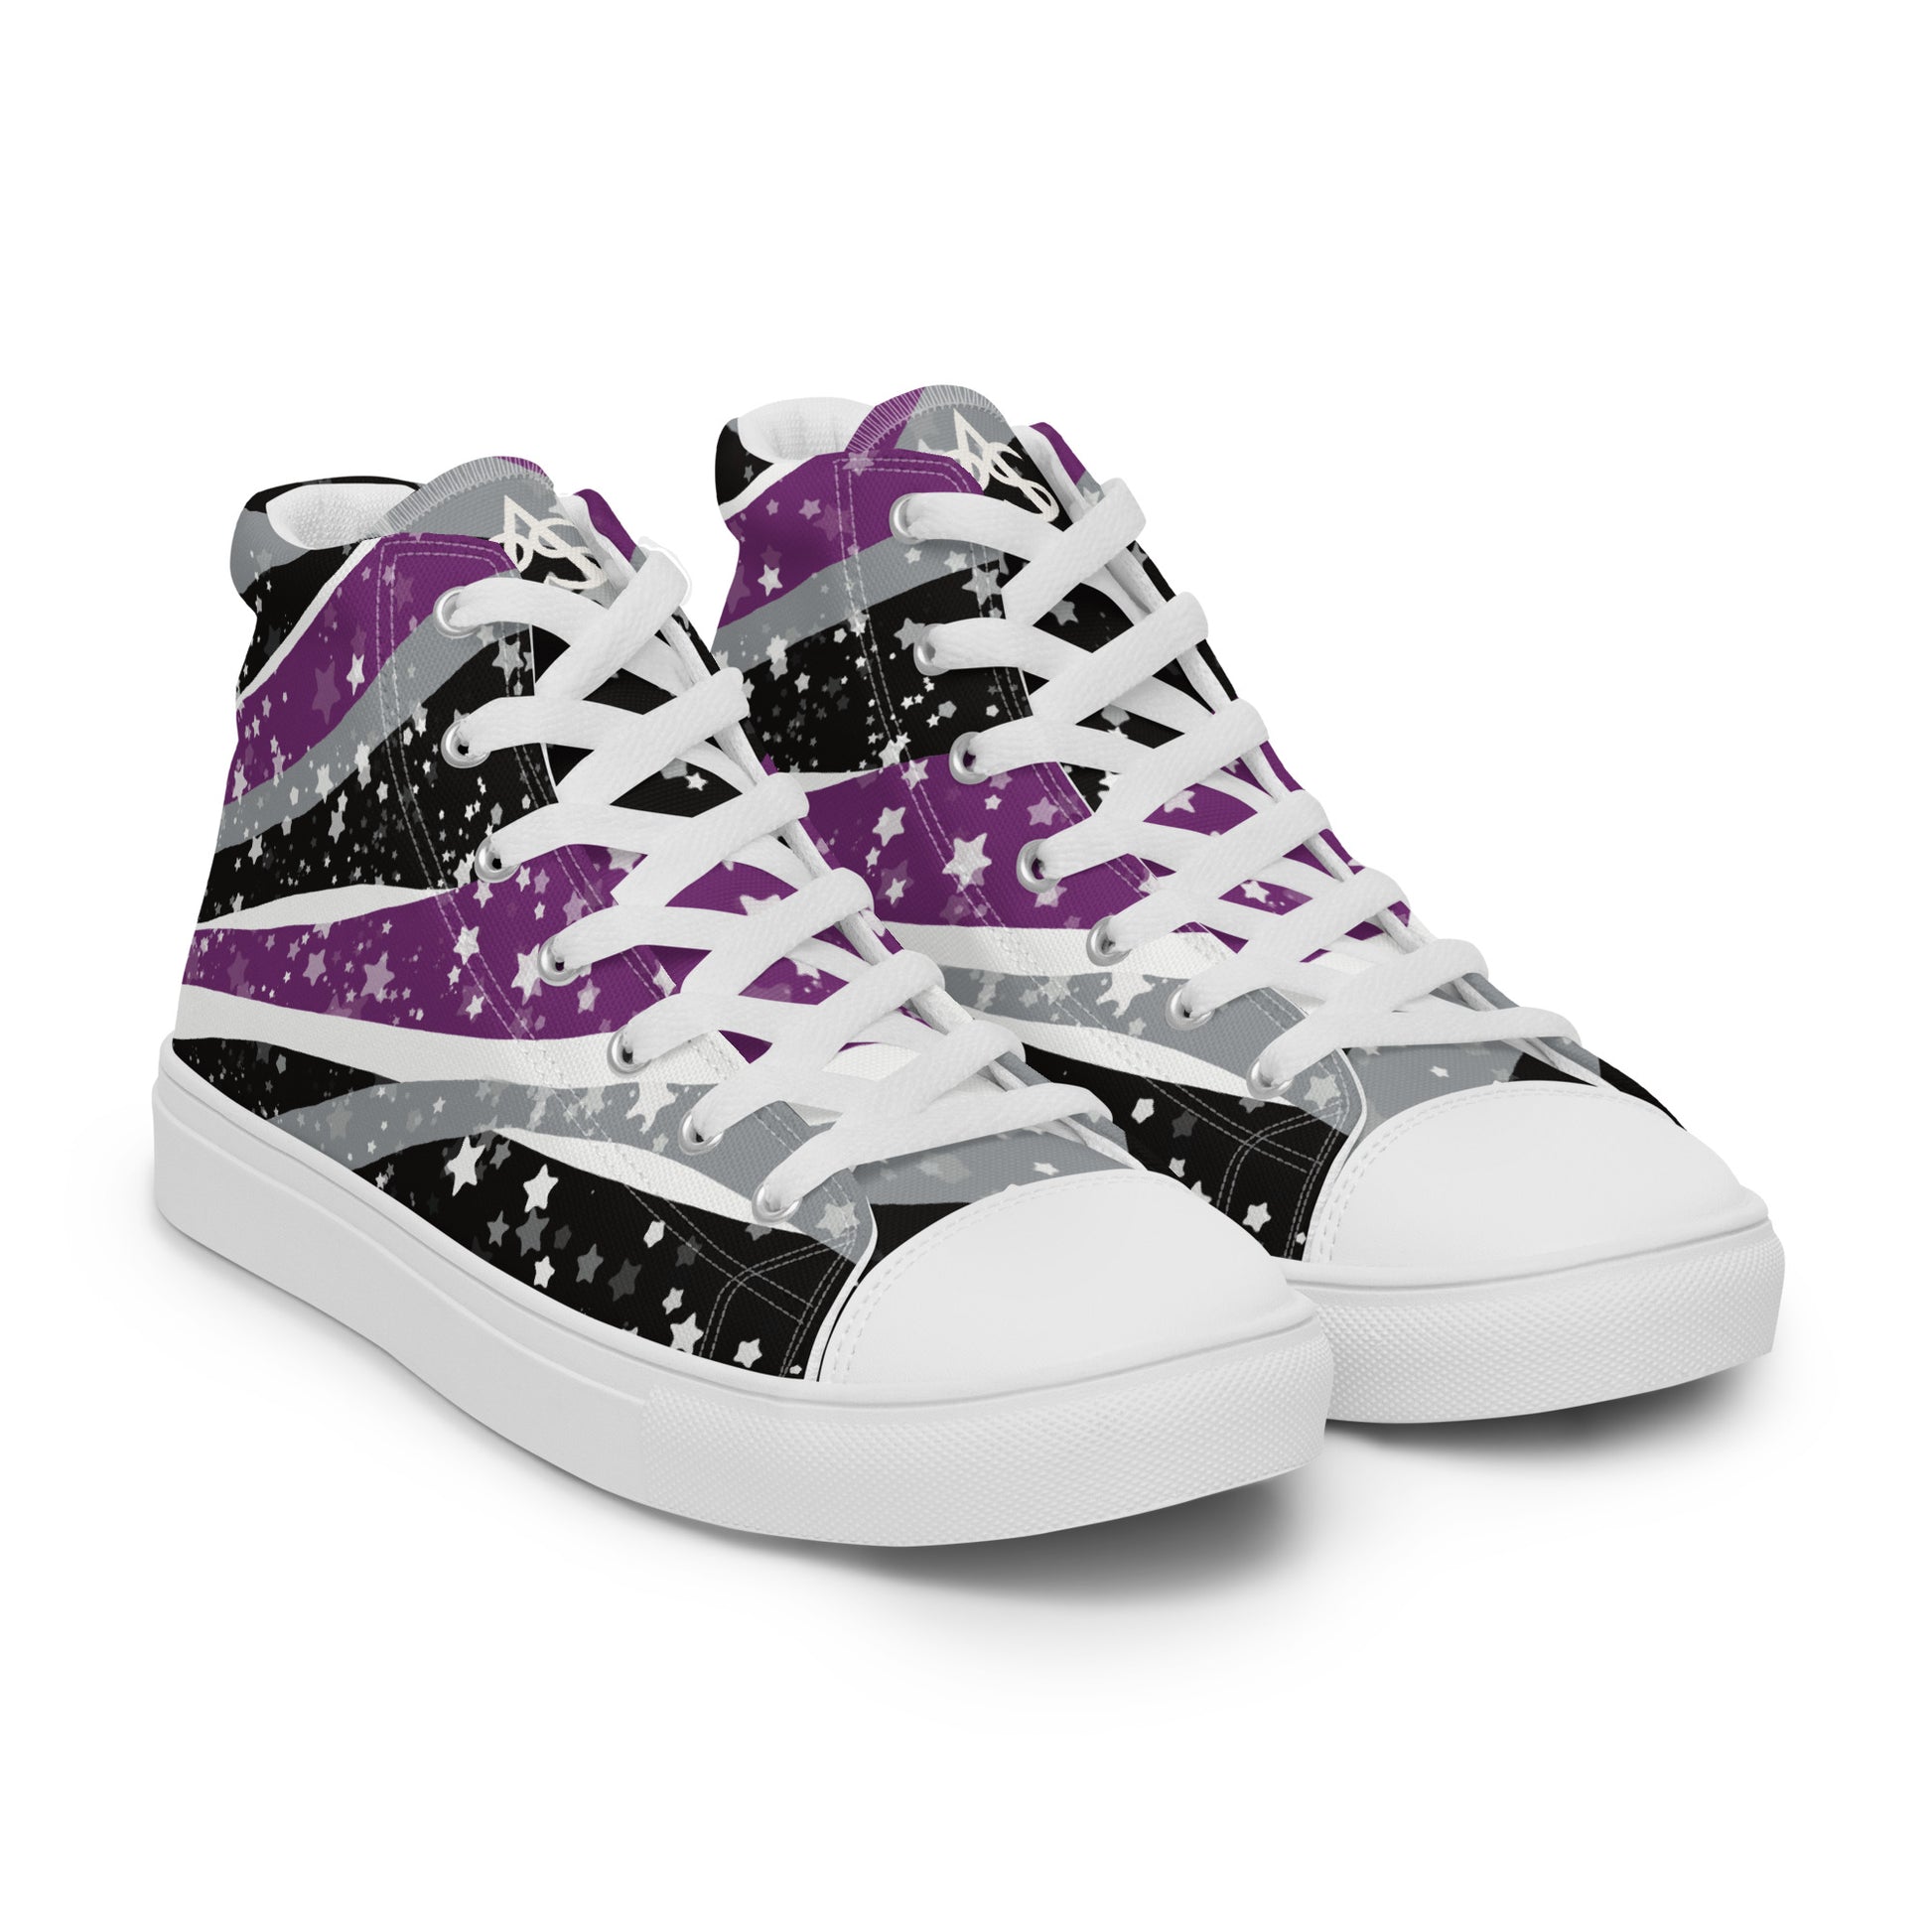 Right front view: a pair of high-top shoes with ribbons of purple, grey, black, and white seem to expand from the heel to the laces with an explosion of stars.